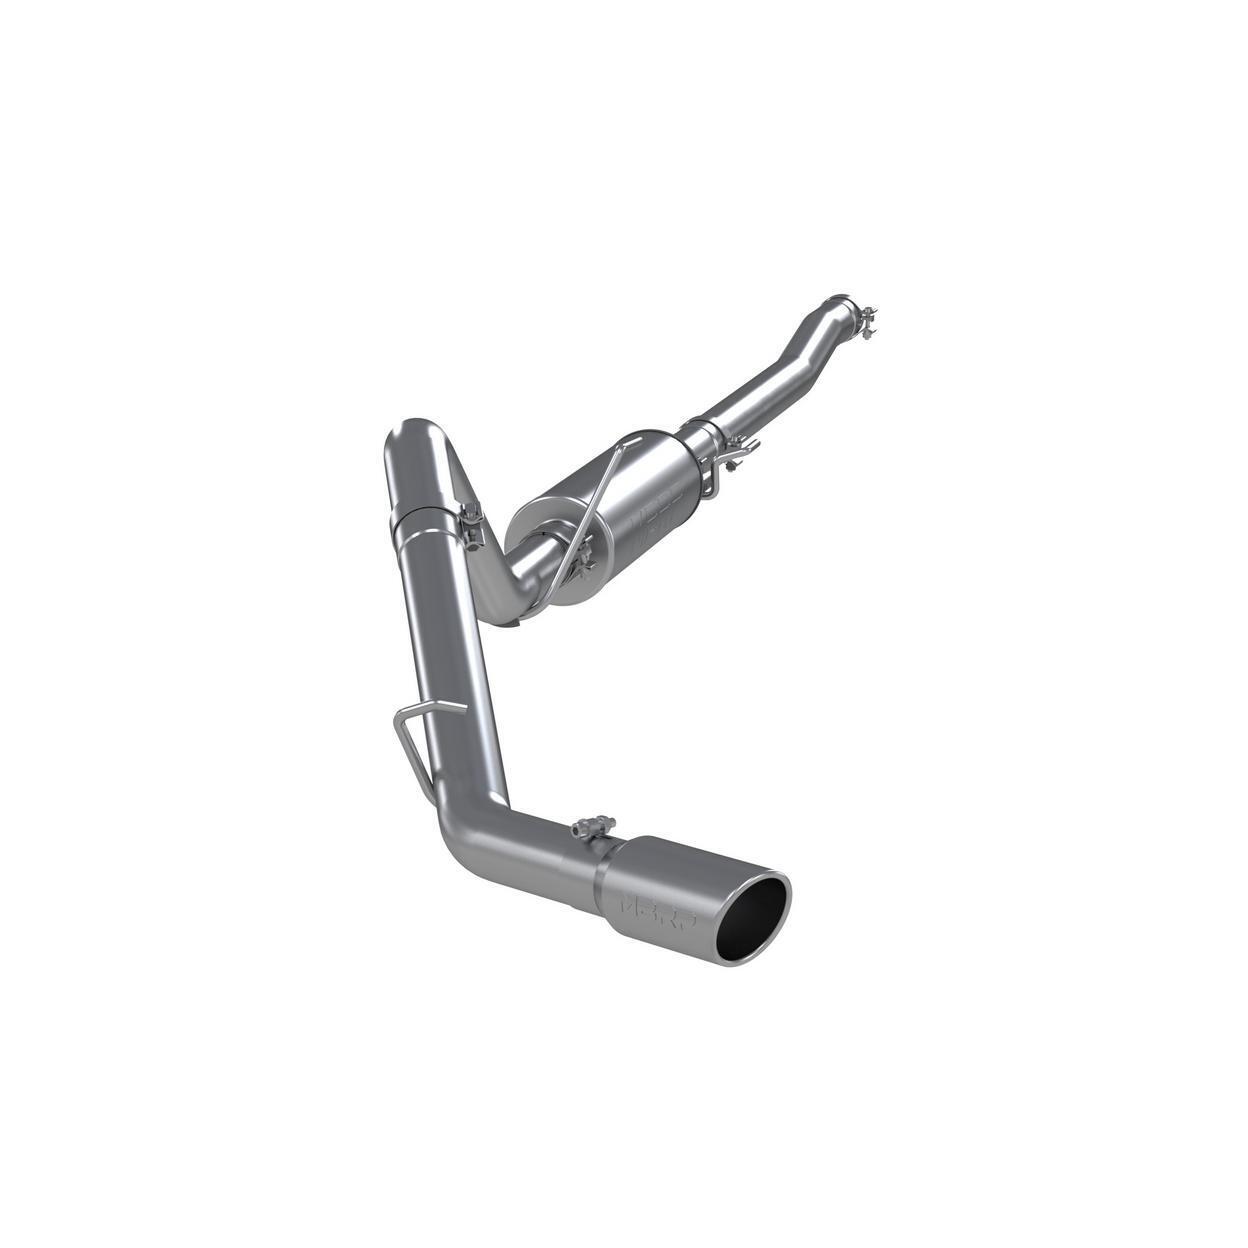 MBRP Exhaust S5148AL-PV Exhaust System Kit for 2011-2012 Ram 3500